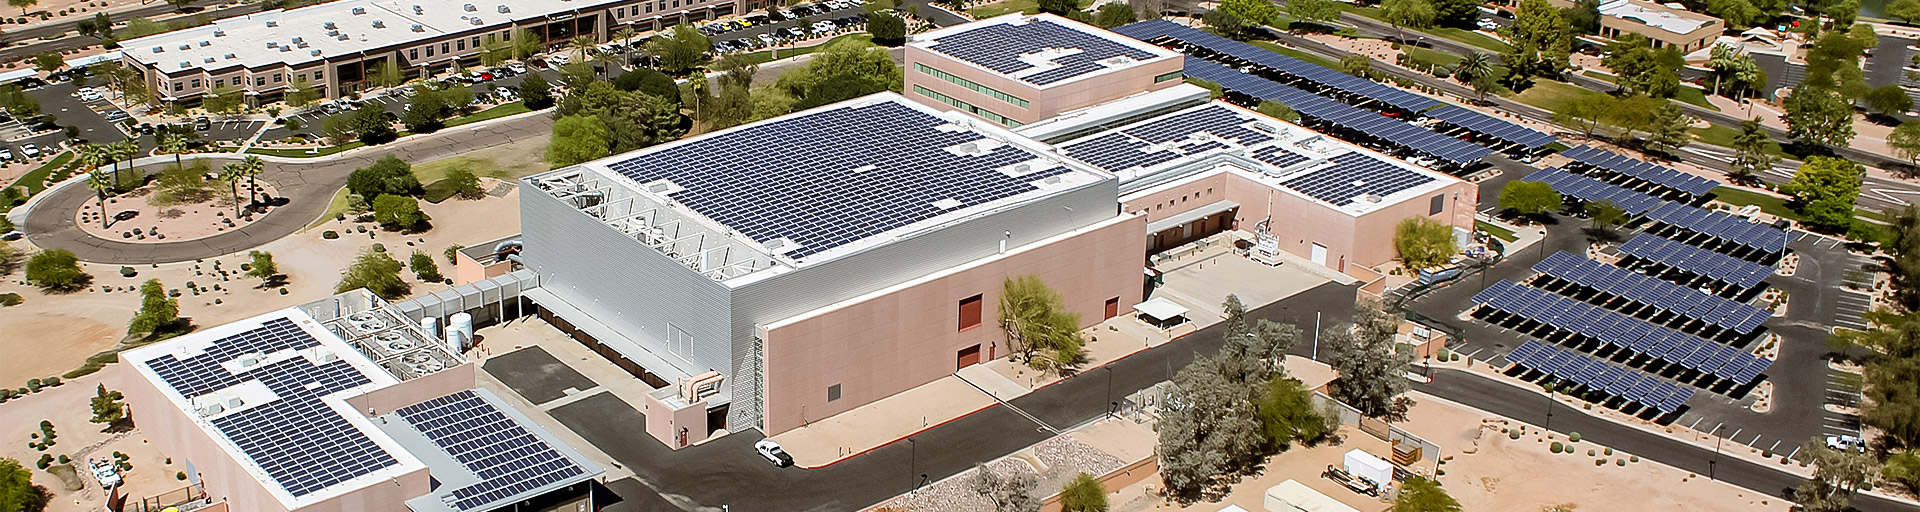 MacroTechnology - Parking Lot and Rooftop solar panels